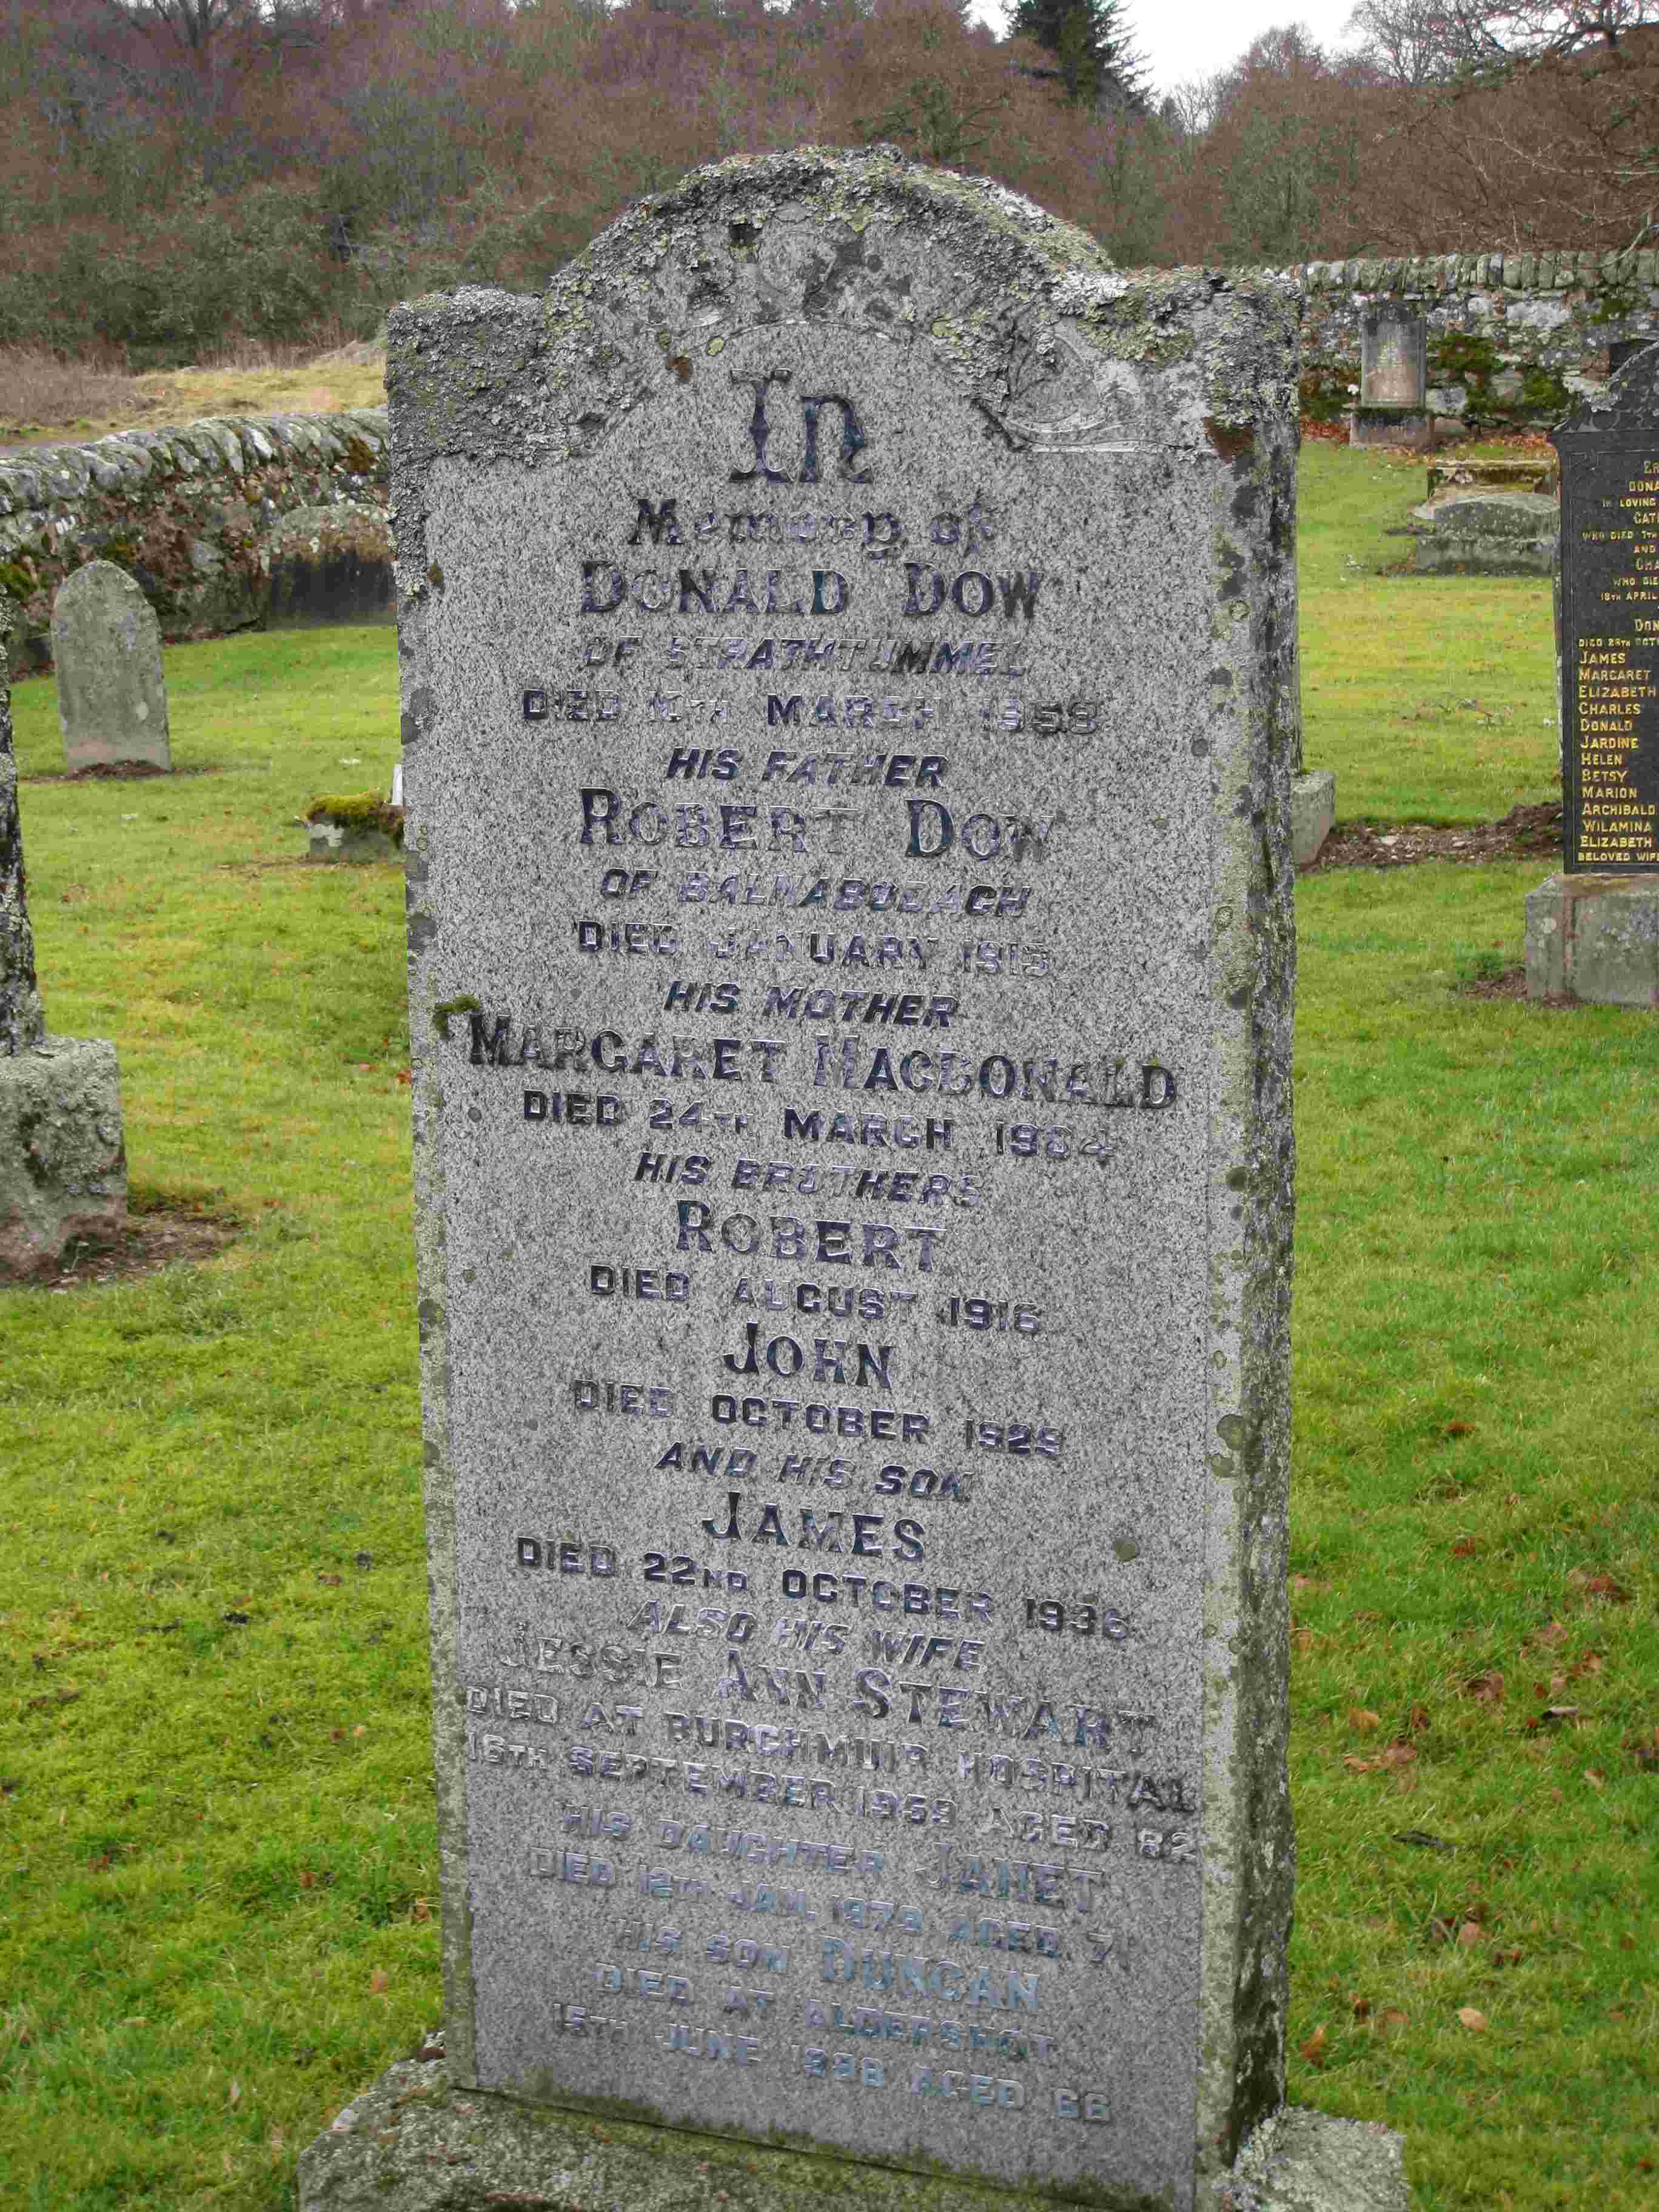 Memorial to Donald Dow of Tomintianda